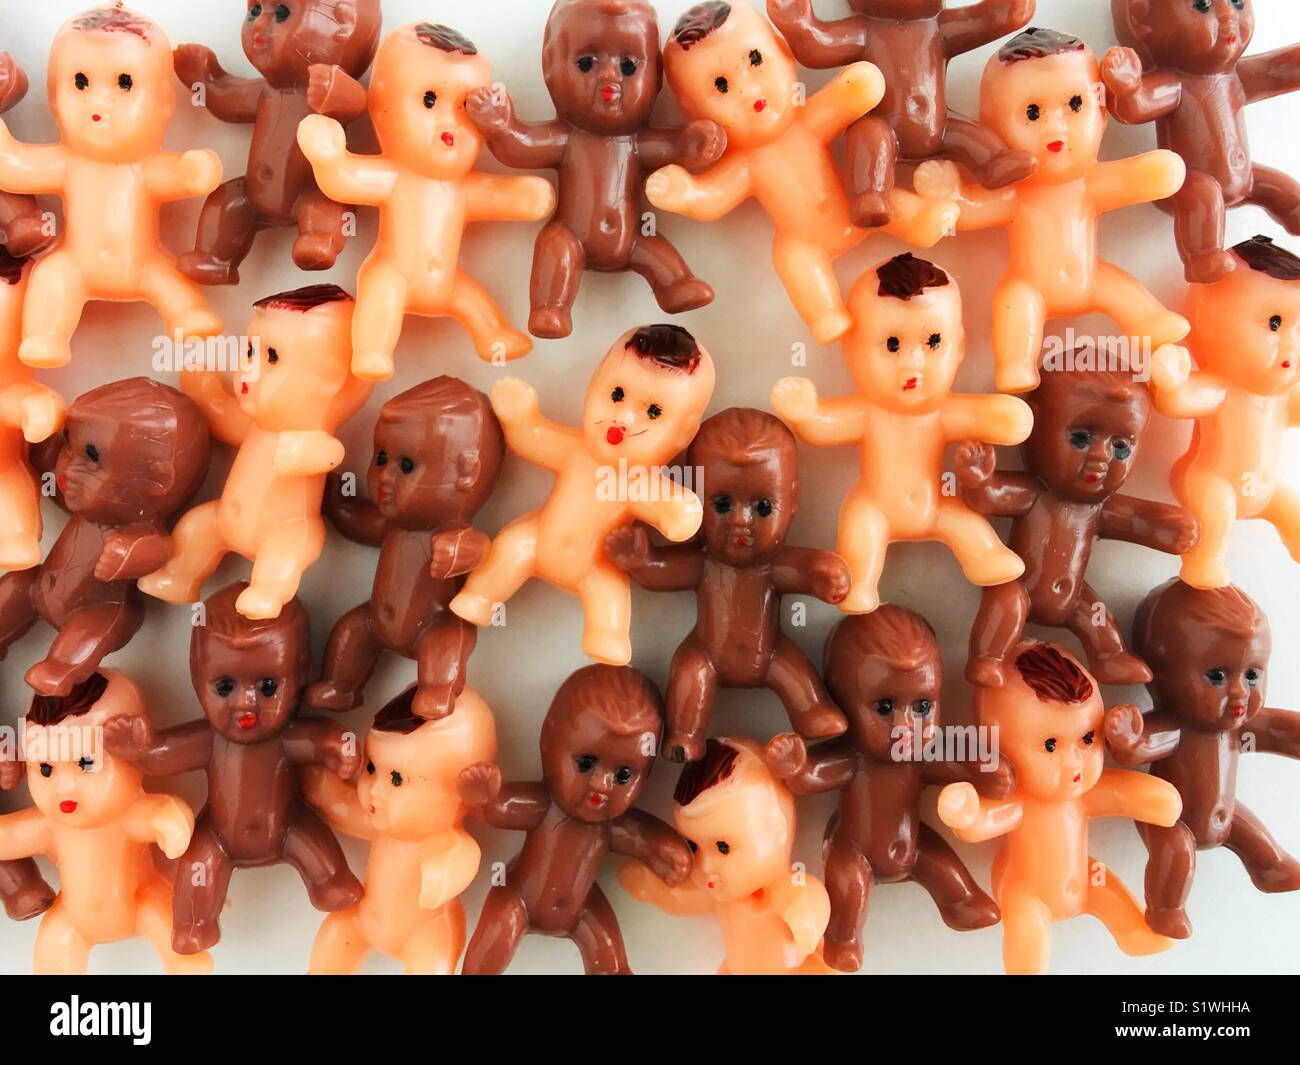 A pile of tiny toy babies. Stock Photo